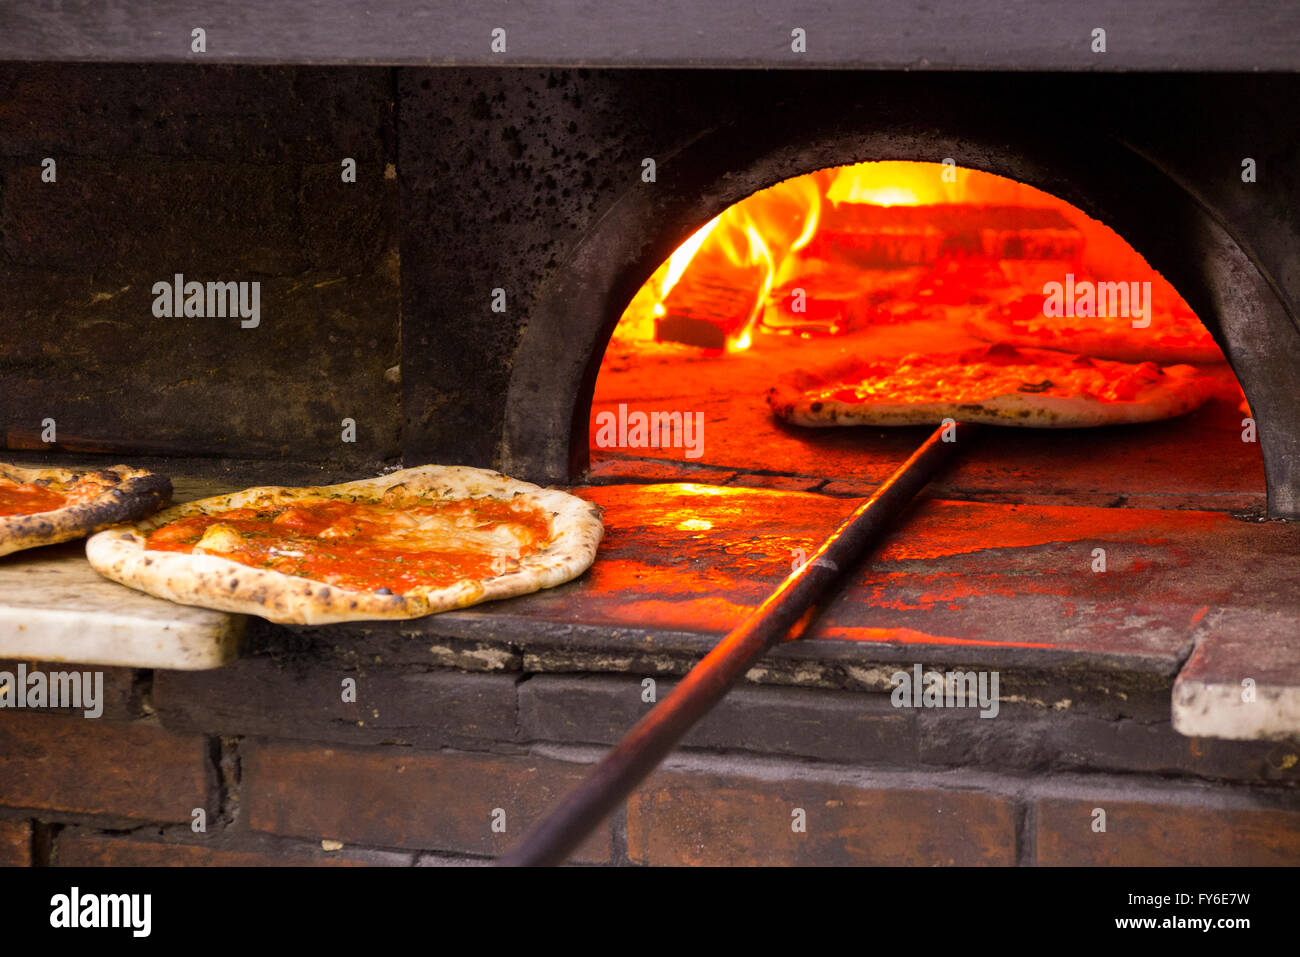 Looking inside a wood burning pizza oven at pizzas being baked in famous Italian restaurant in Naples, Pizzeria da Michele Stock Photo